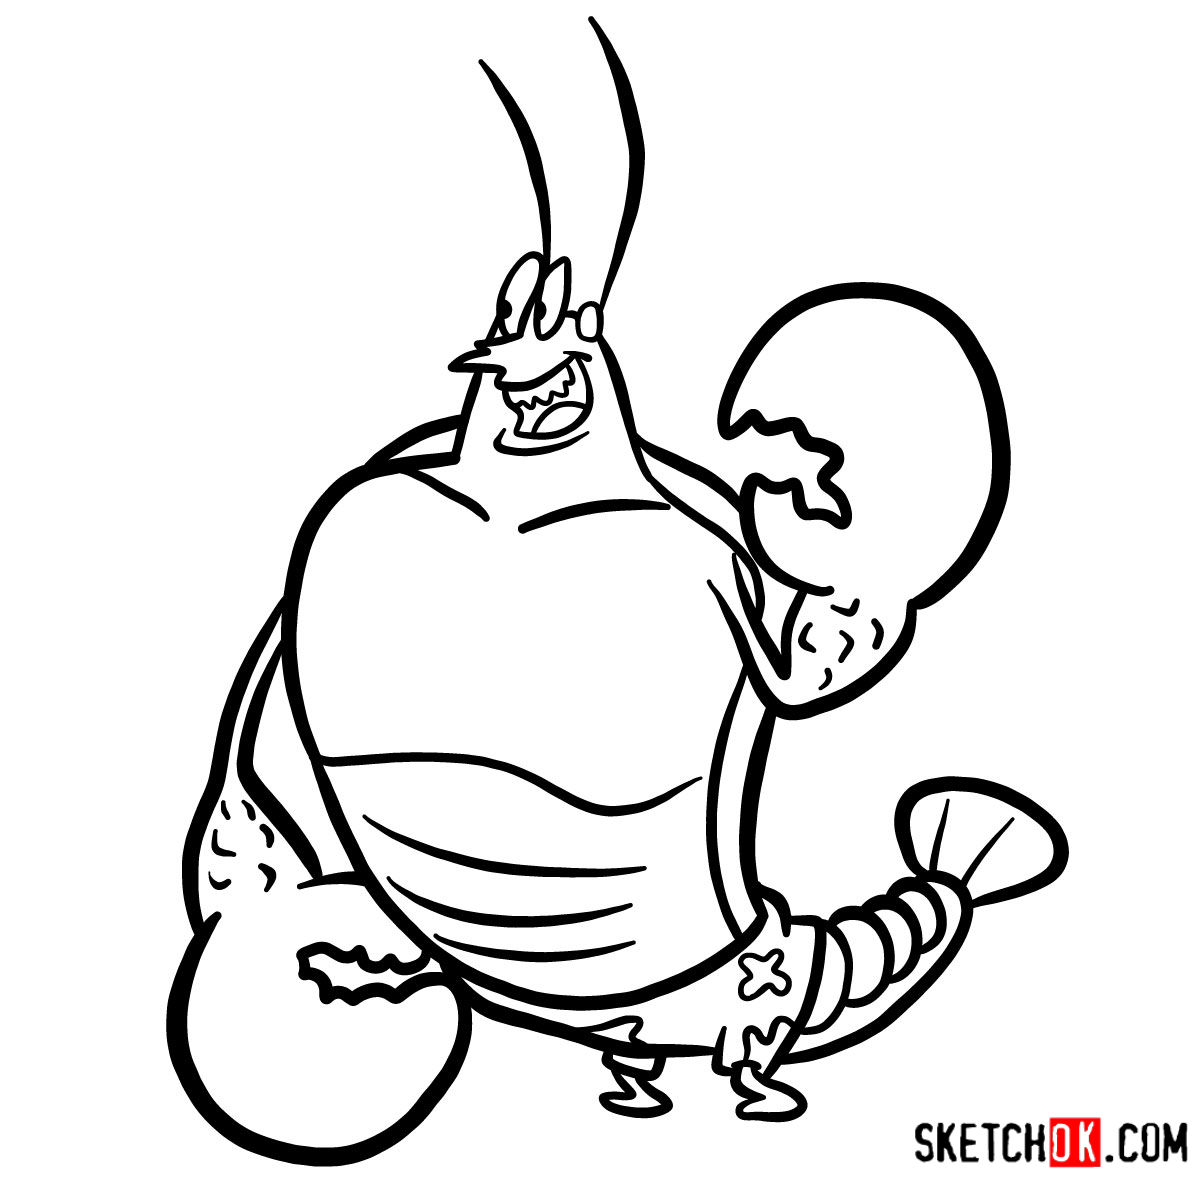 How to draw Larry the Lobster